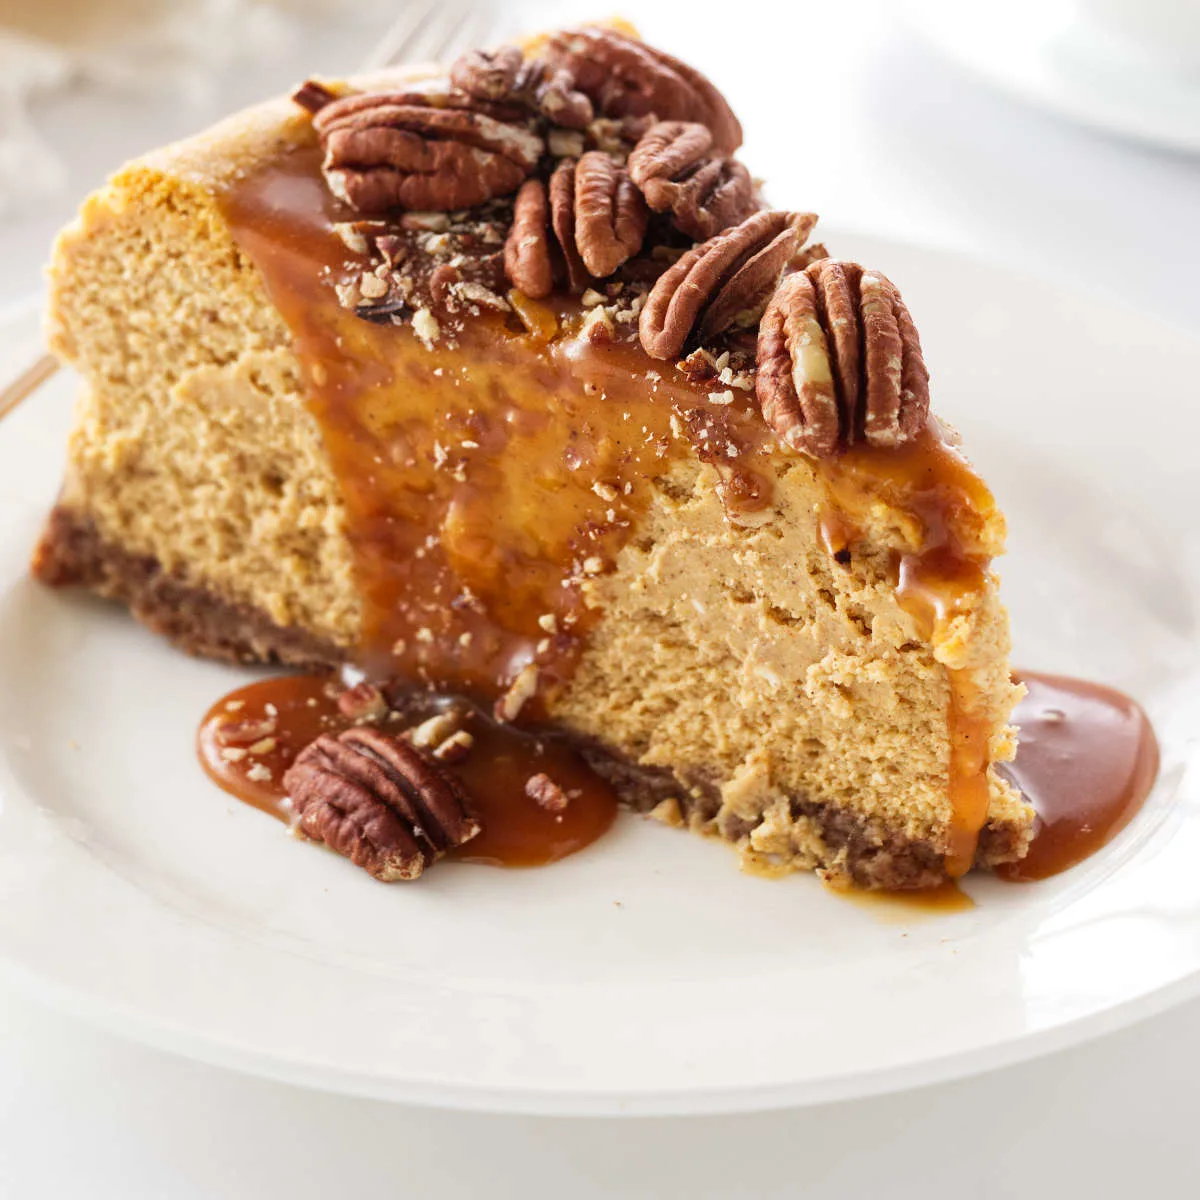 a slice of pumpkin cheesecake with pecans and caramel sauce